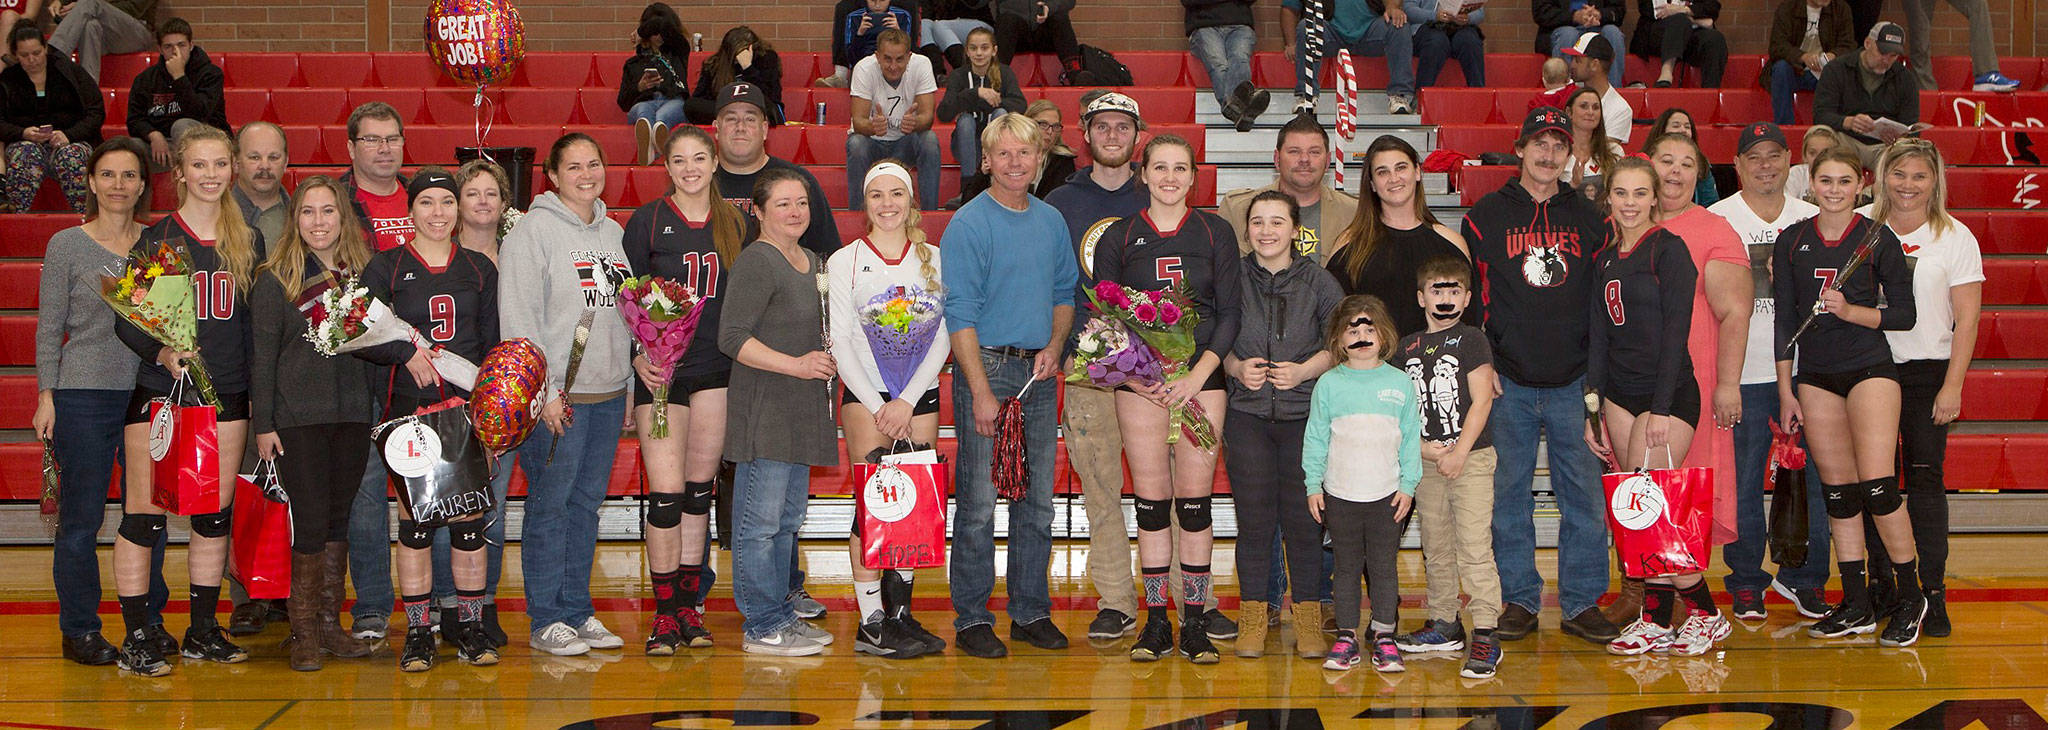 The Coupeville seniors, their familes and their friends were honored Wednesday. The senior players, from the left, are Allison Wenzel (10), Lauren Rose (9), Katrina McGranahan (11), Hope Lodell (white jersey), Mikayla Elfrank (5), Kyla Briscoe (8) and Payton Aparicio (7). Senior manager Kayla Rose is fourth from the left. (Photo by John Fisken)